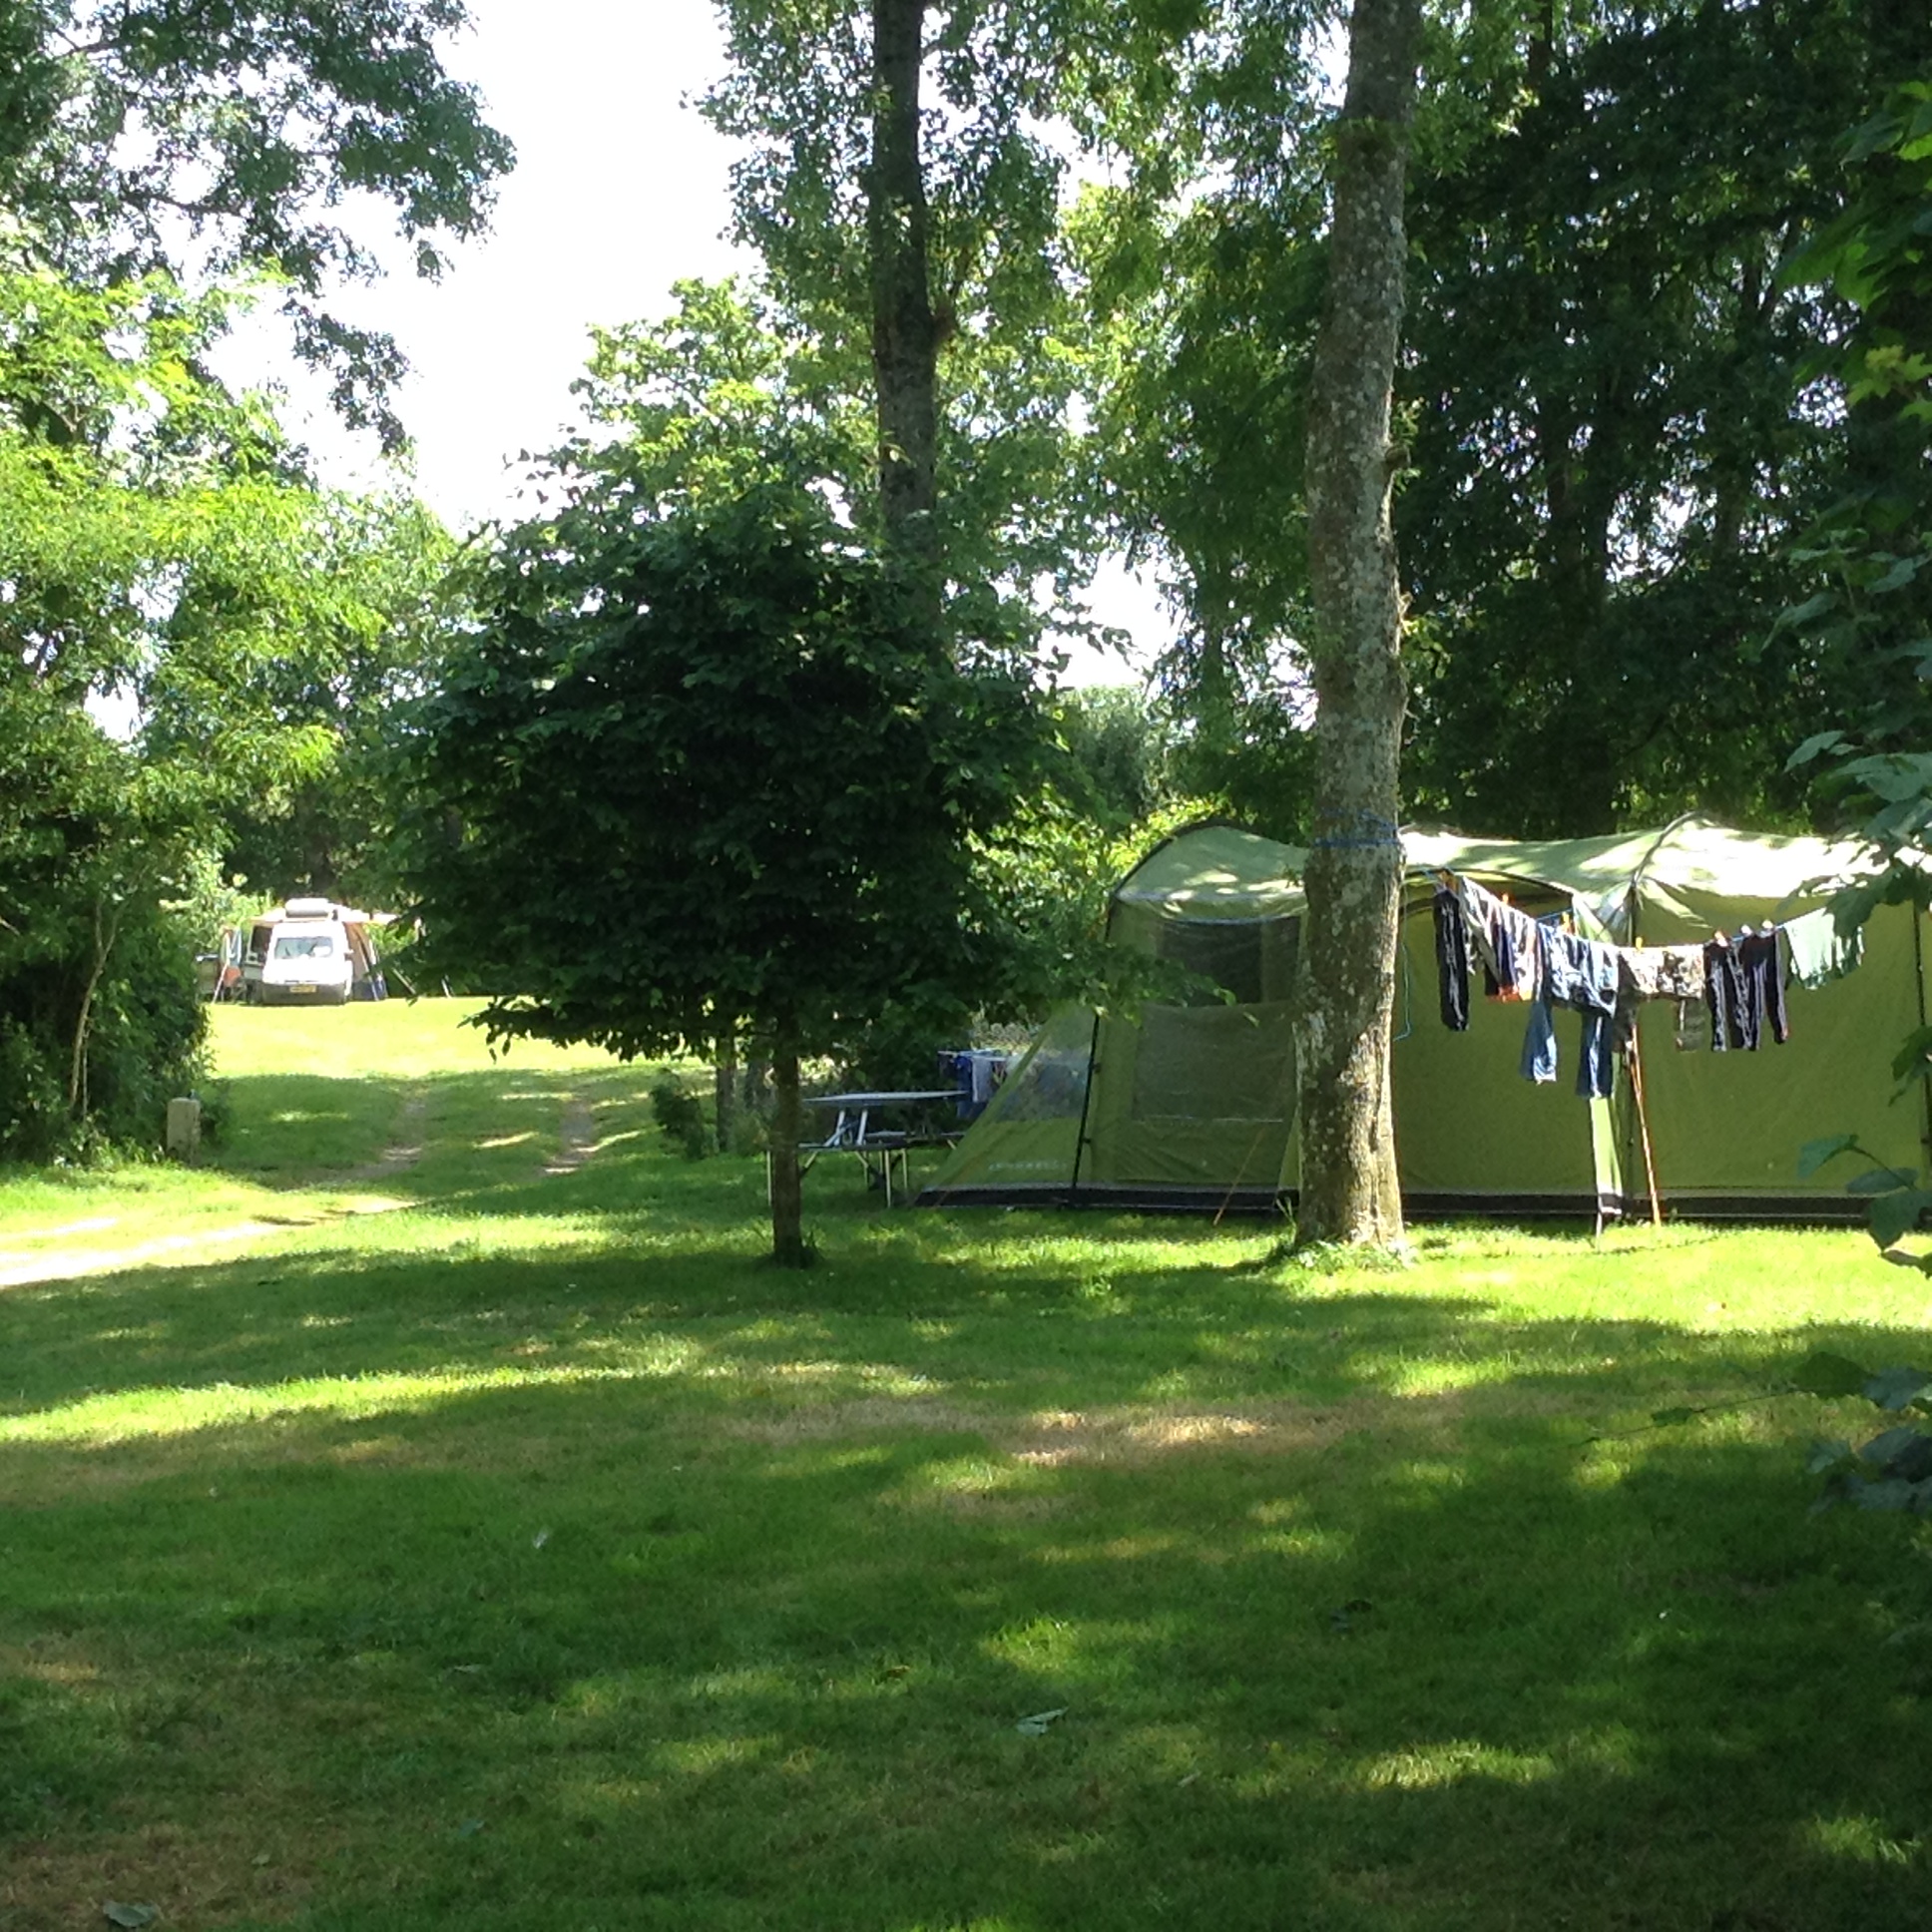 Clothes drying on the line at Middle Camping site